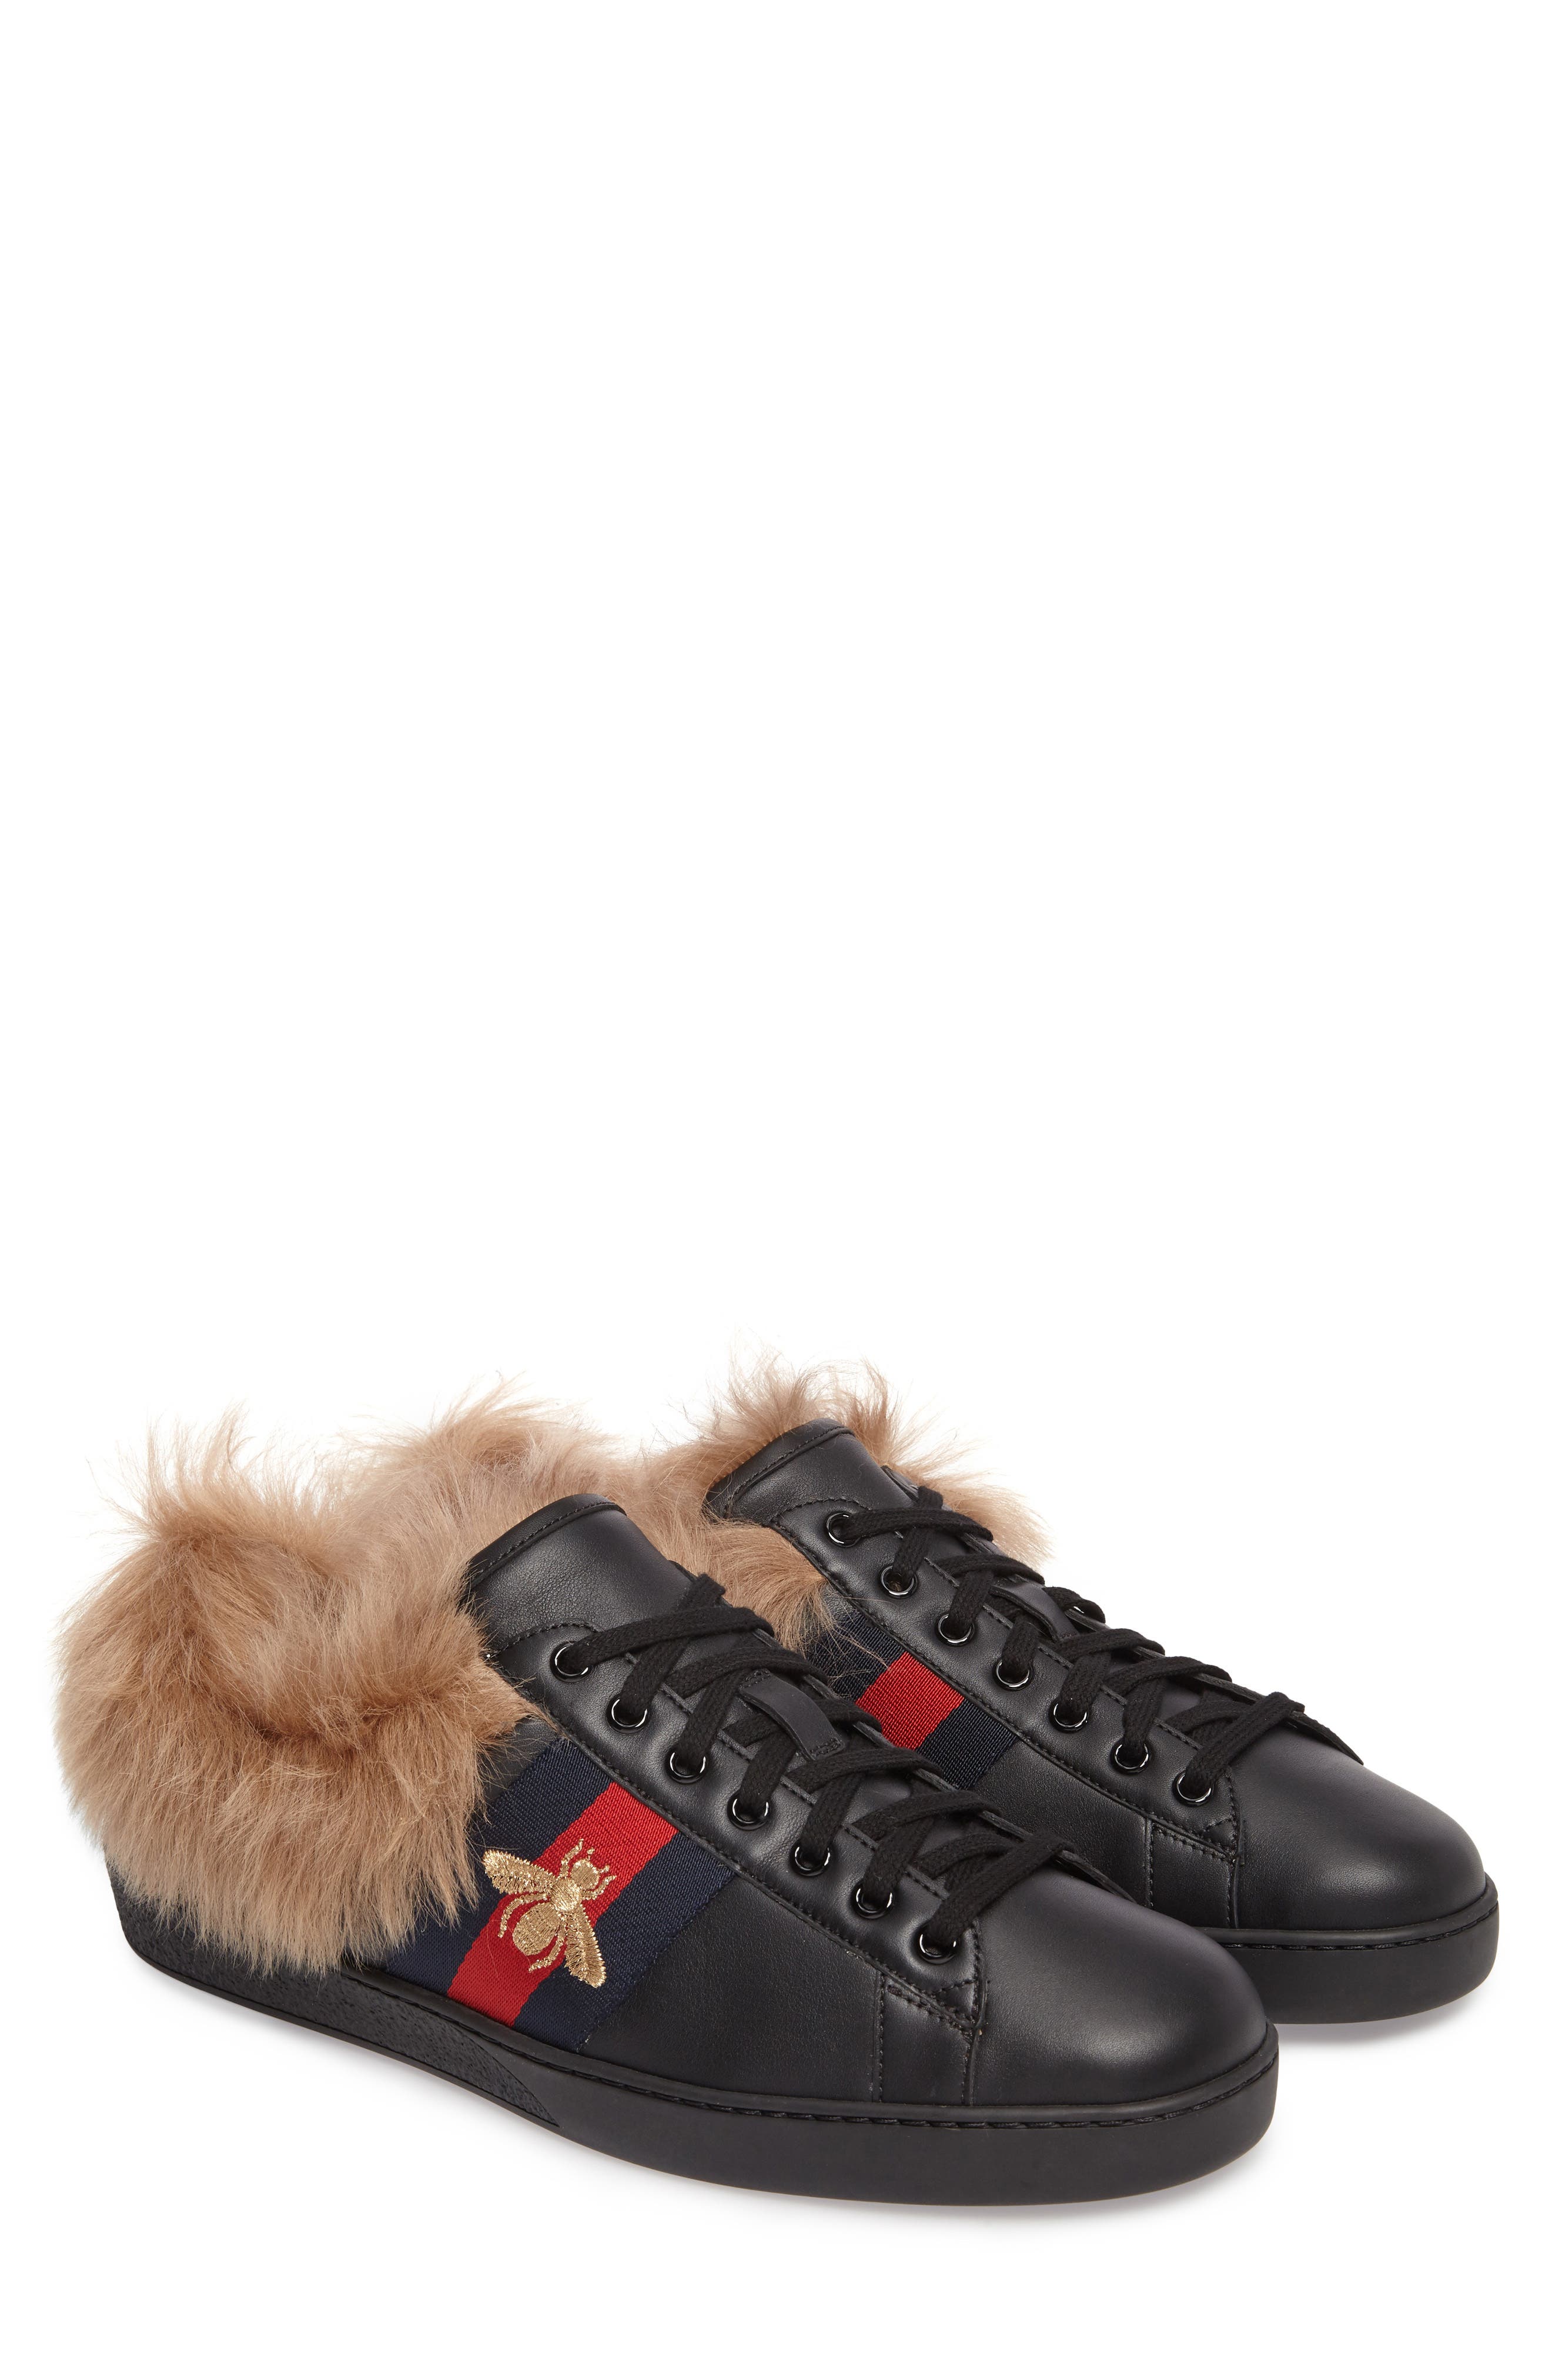 mens gucci shoes with fur